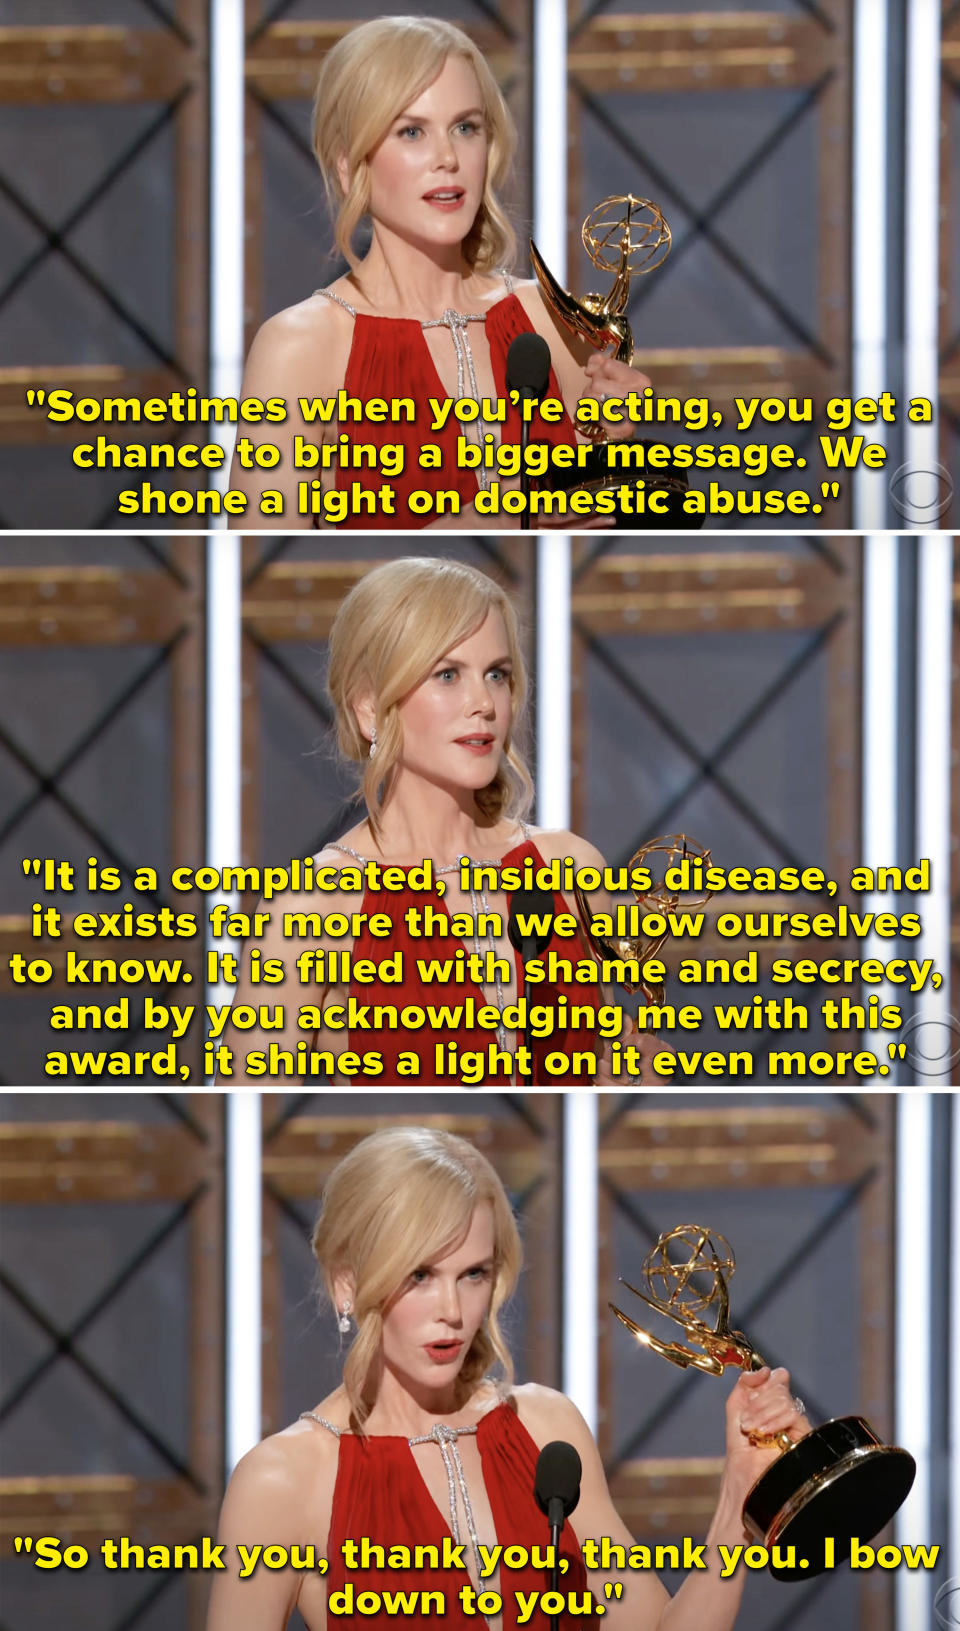 Nicole accepting her Emmy Award and talking about domestic violence